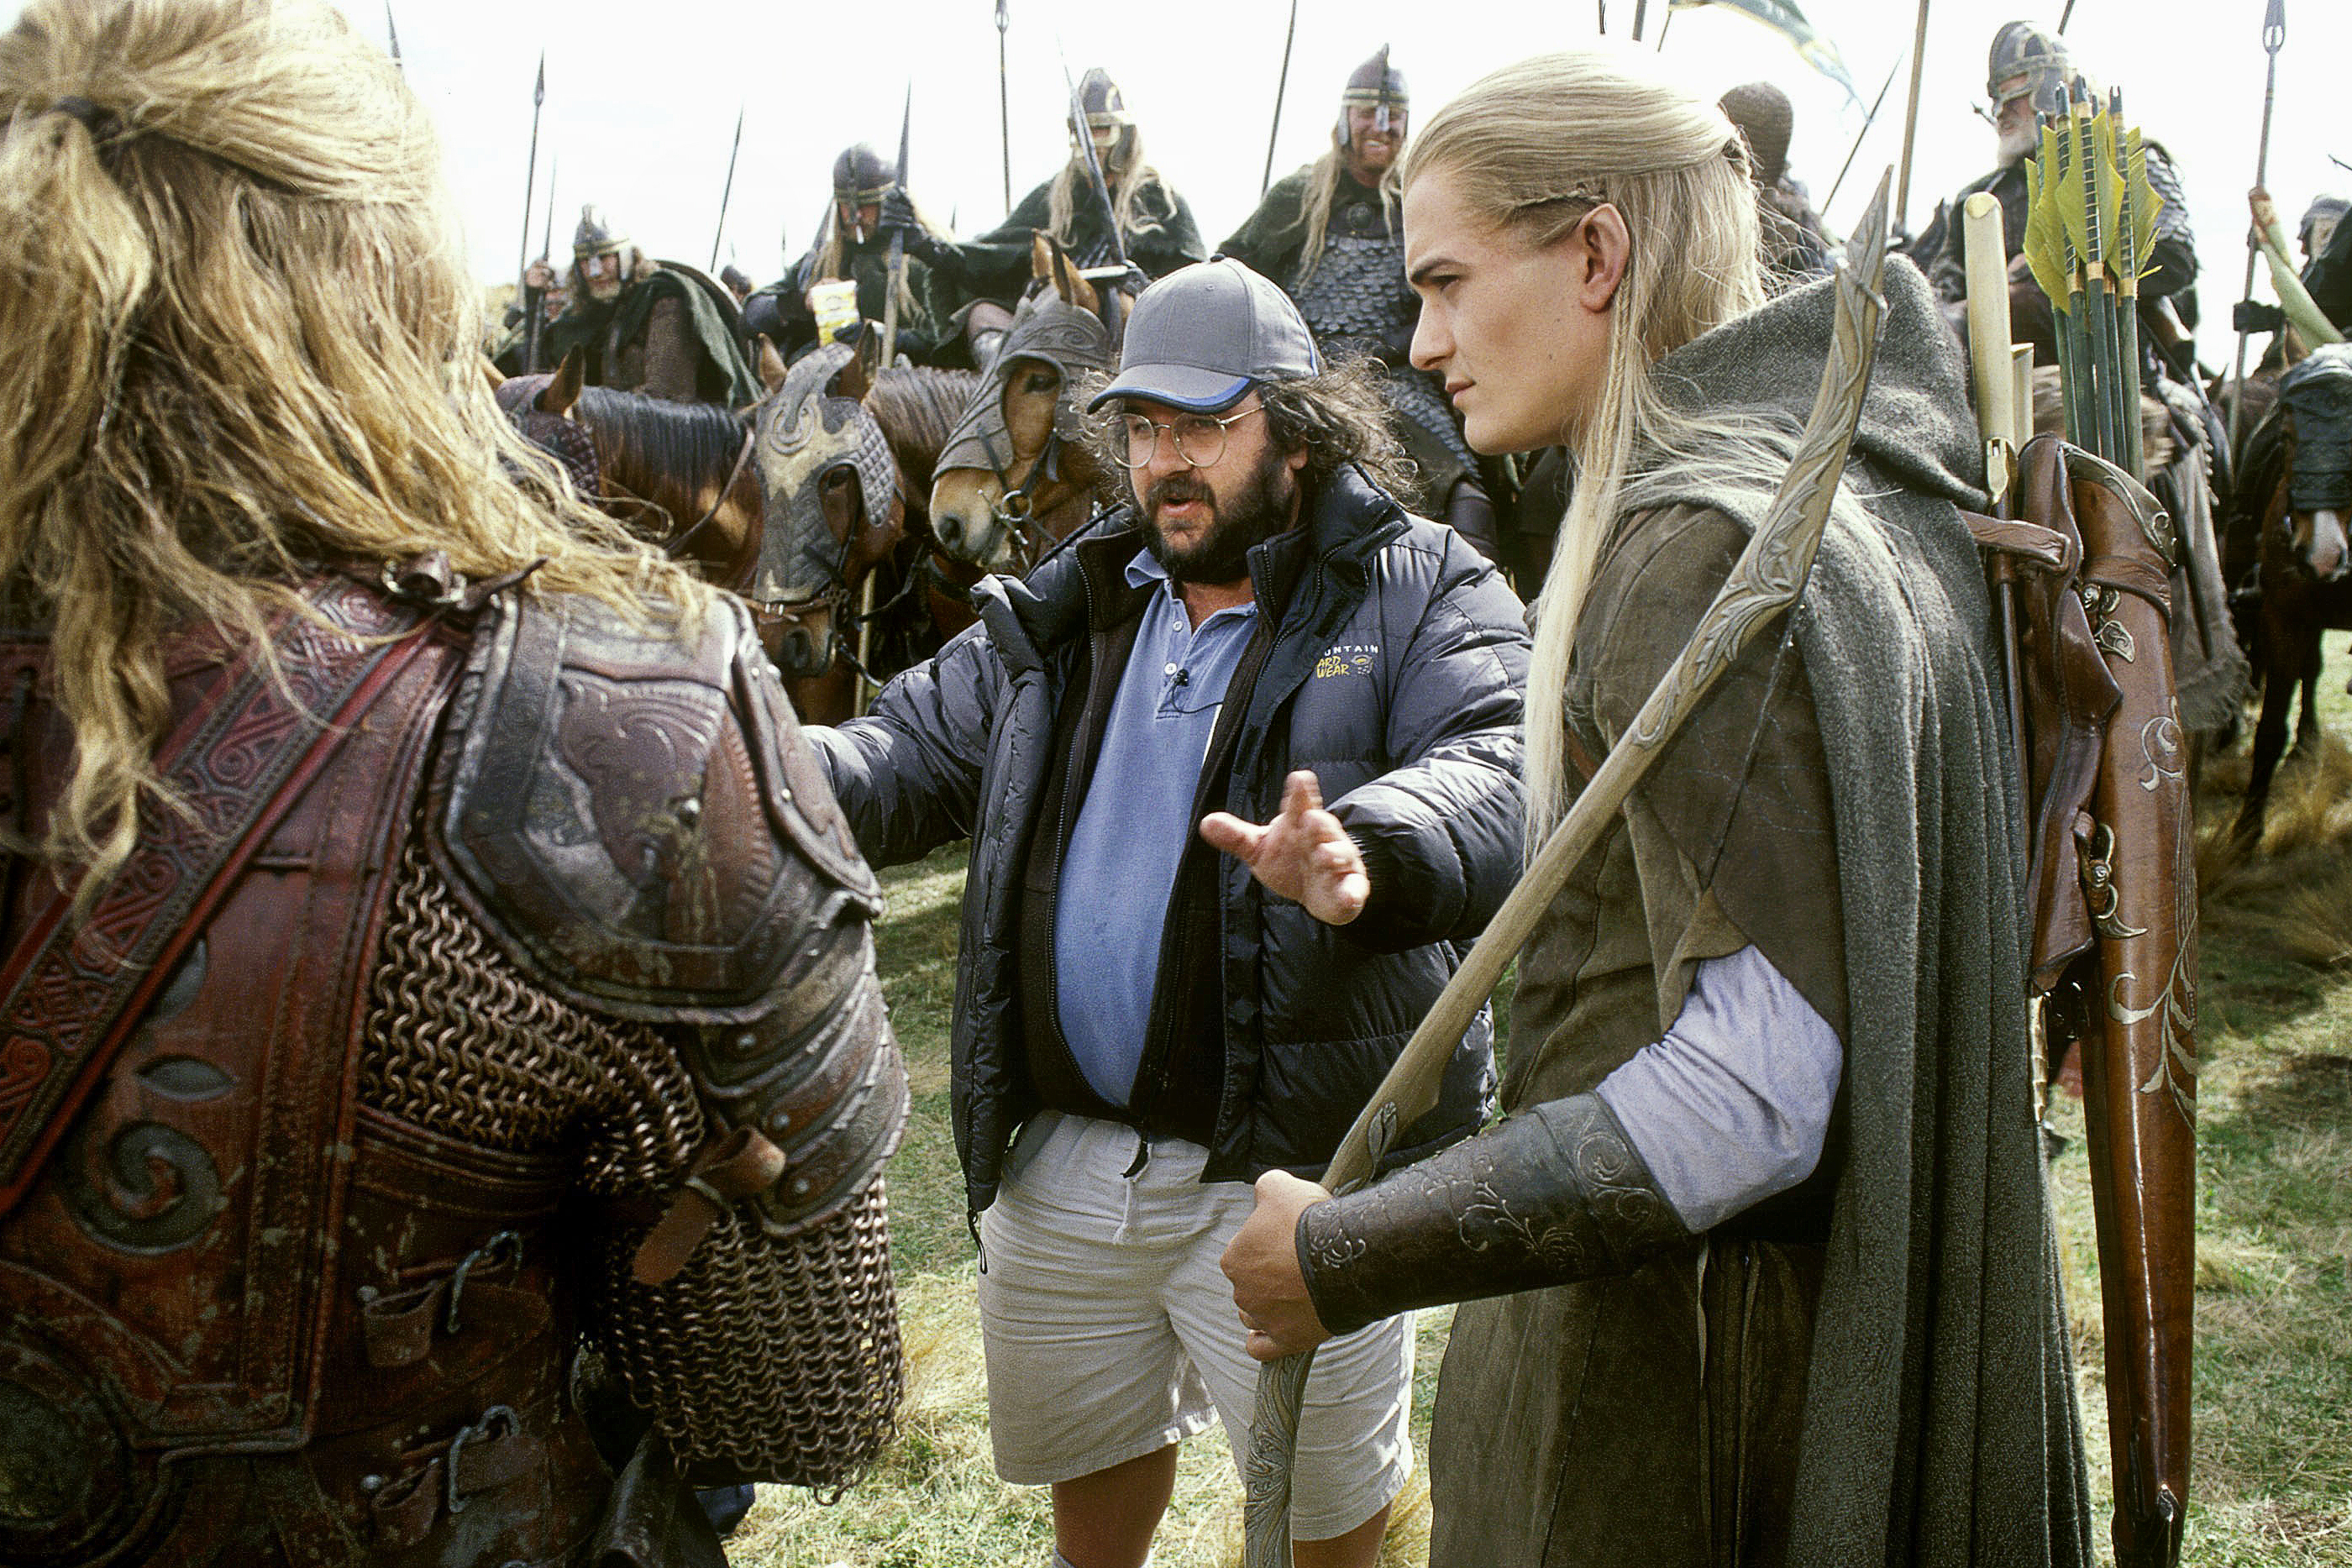 Director Peter Jackson on location filming The Lord of the Rings movies